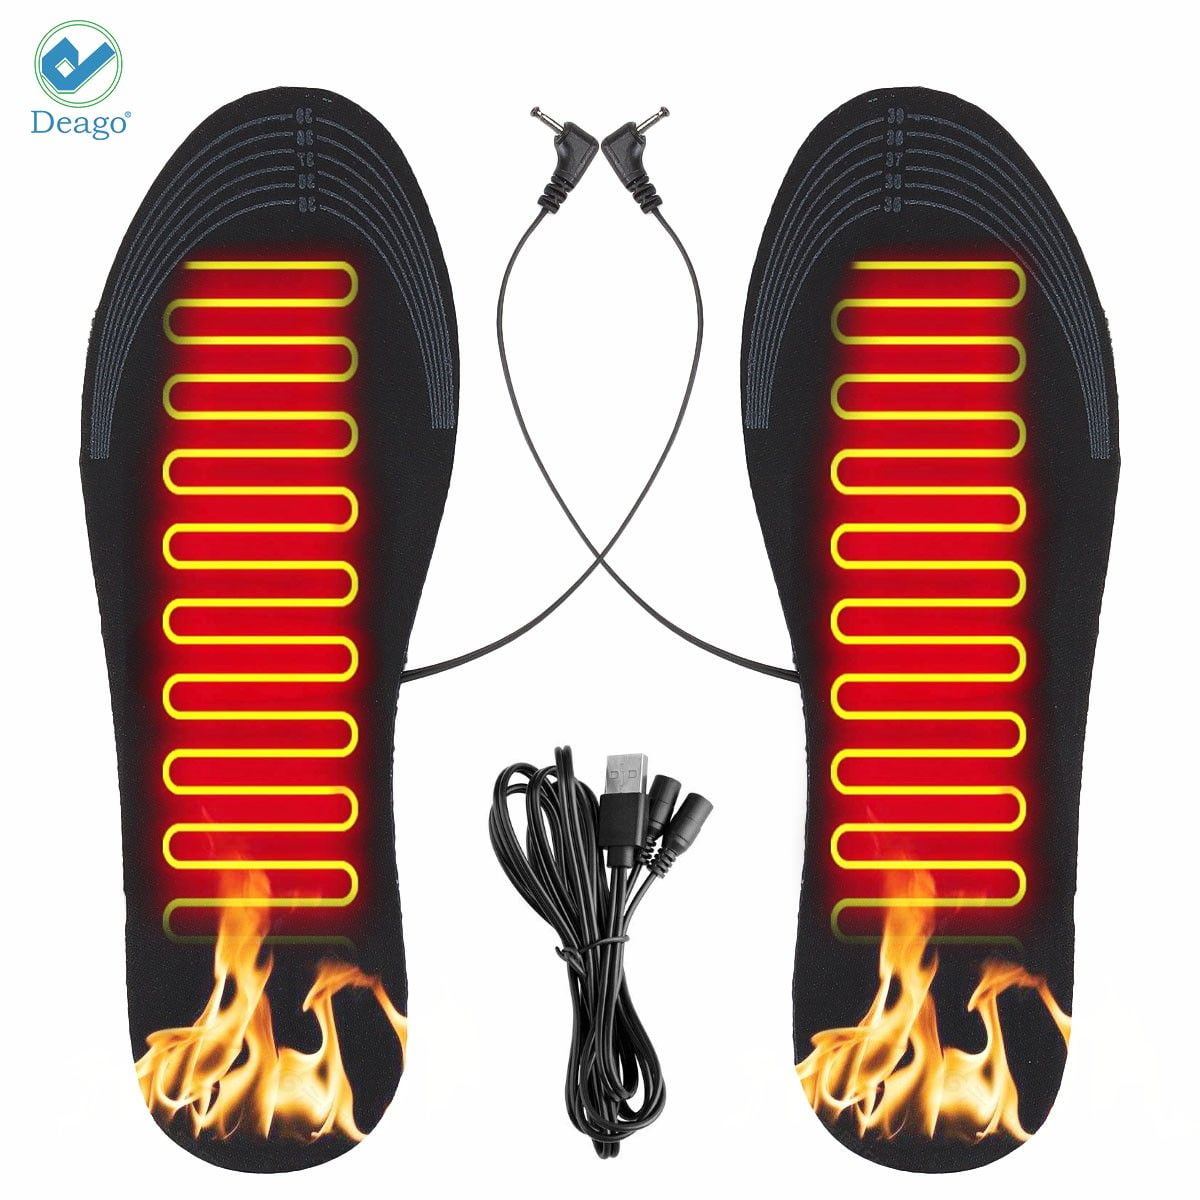 Details about   1 Pair USB Heated Shoe Insoles Foot Warming Pad Winter Feet Warmer Sock Pad  Jd 